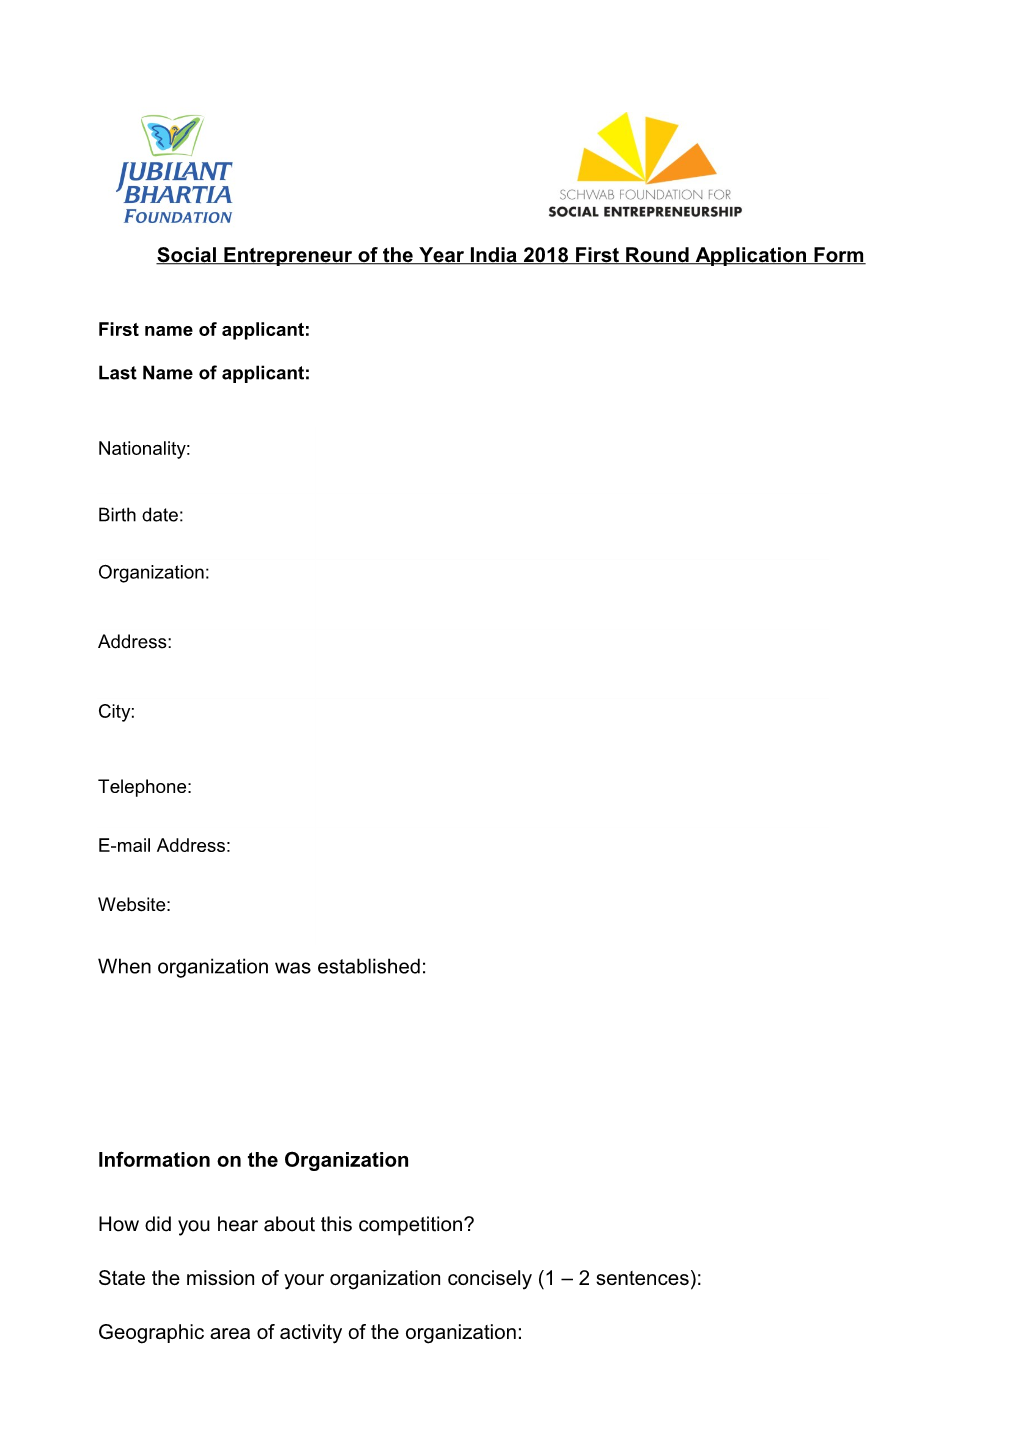 Social Entrepreneur of the Year India 2018 First Round Application Form